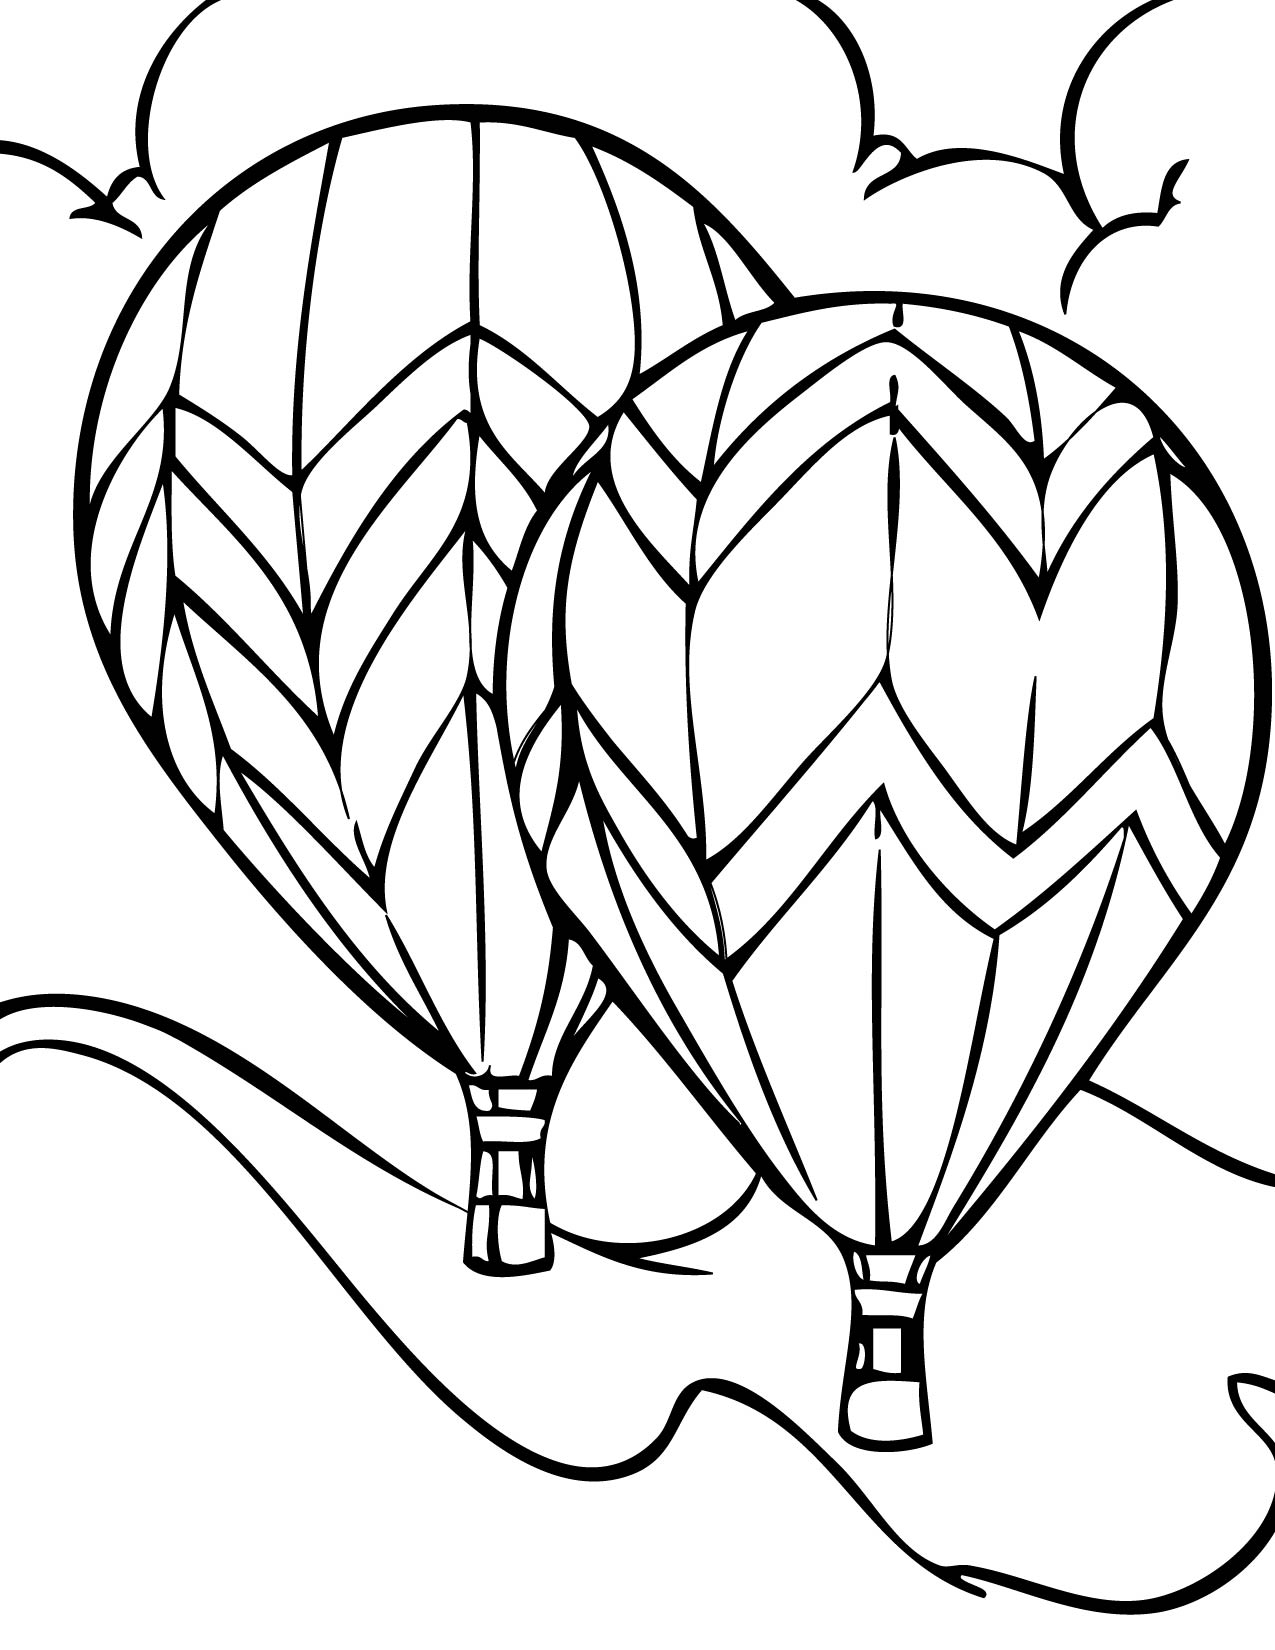 1000+ images about Balloons